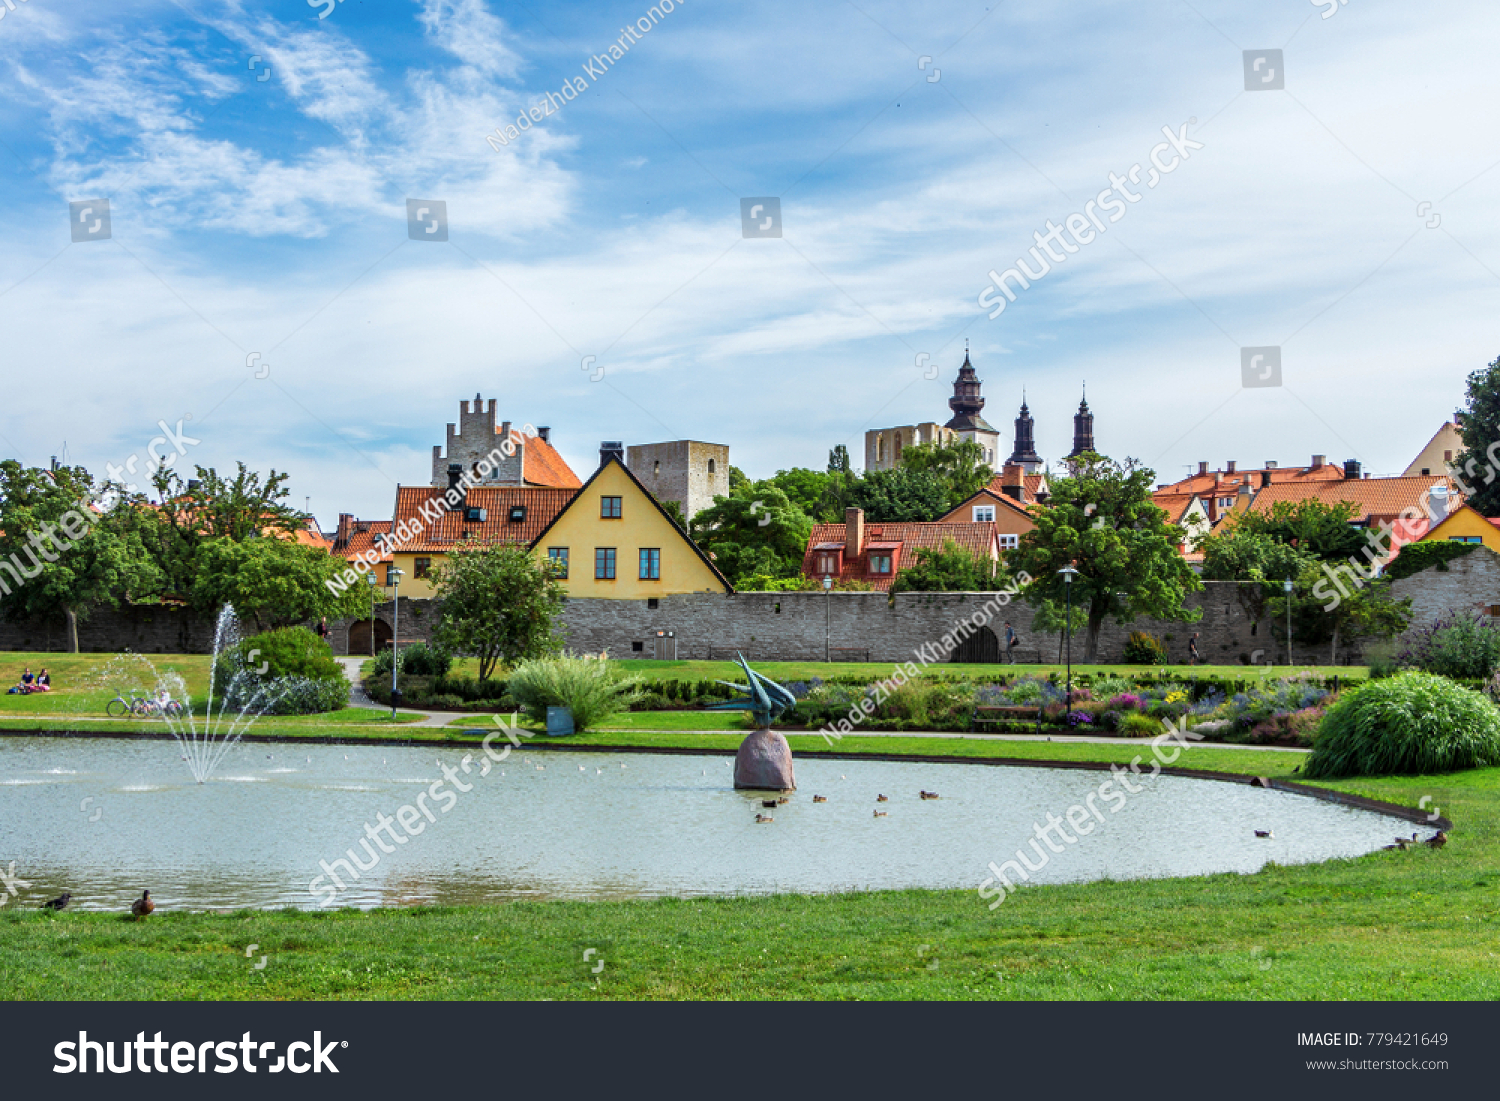 Park Almedalen in Visby, the main city on island Gotland, Sweden. The best-preserved historical medieval city in Scandinavia. Beautiful view with color old buildings, lake, resting or relaxing people. #779421649